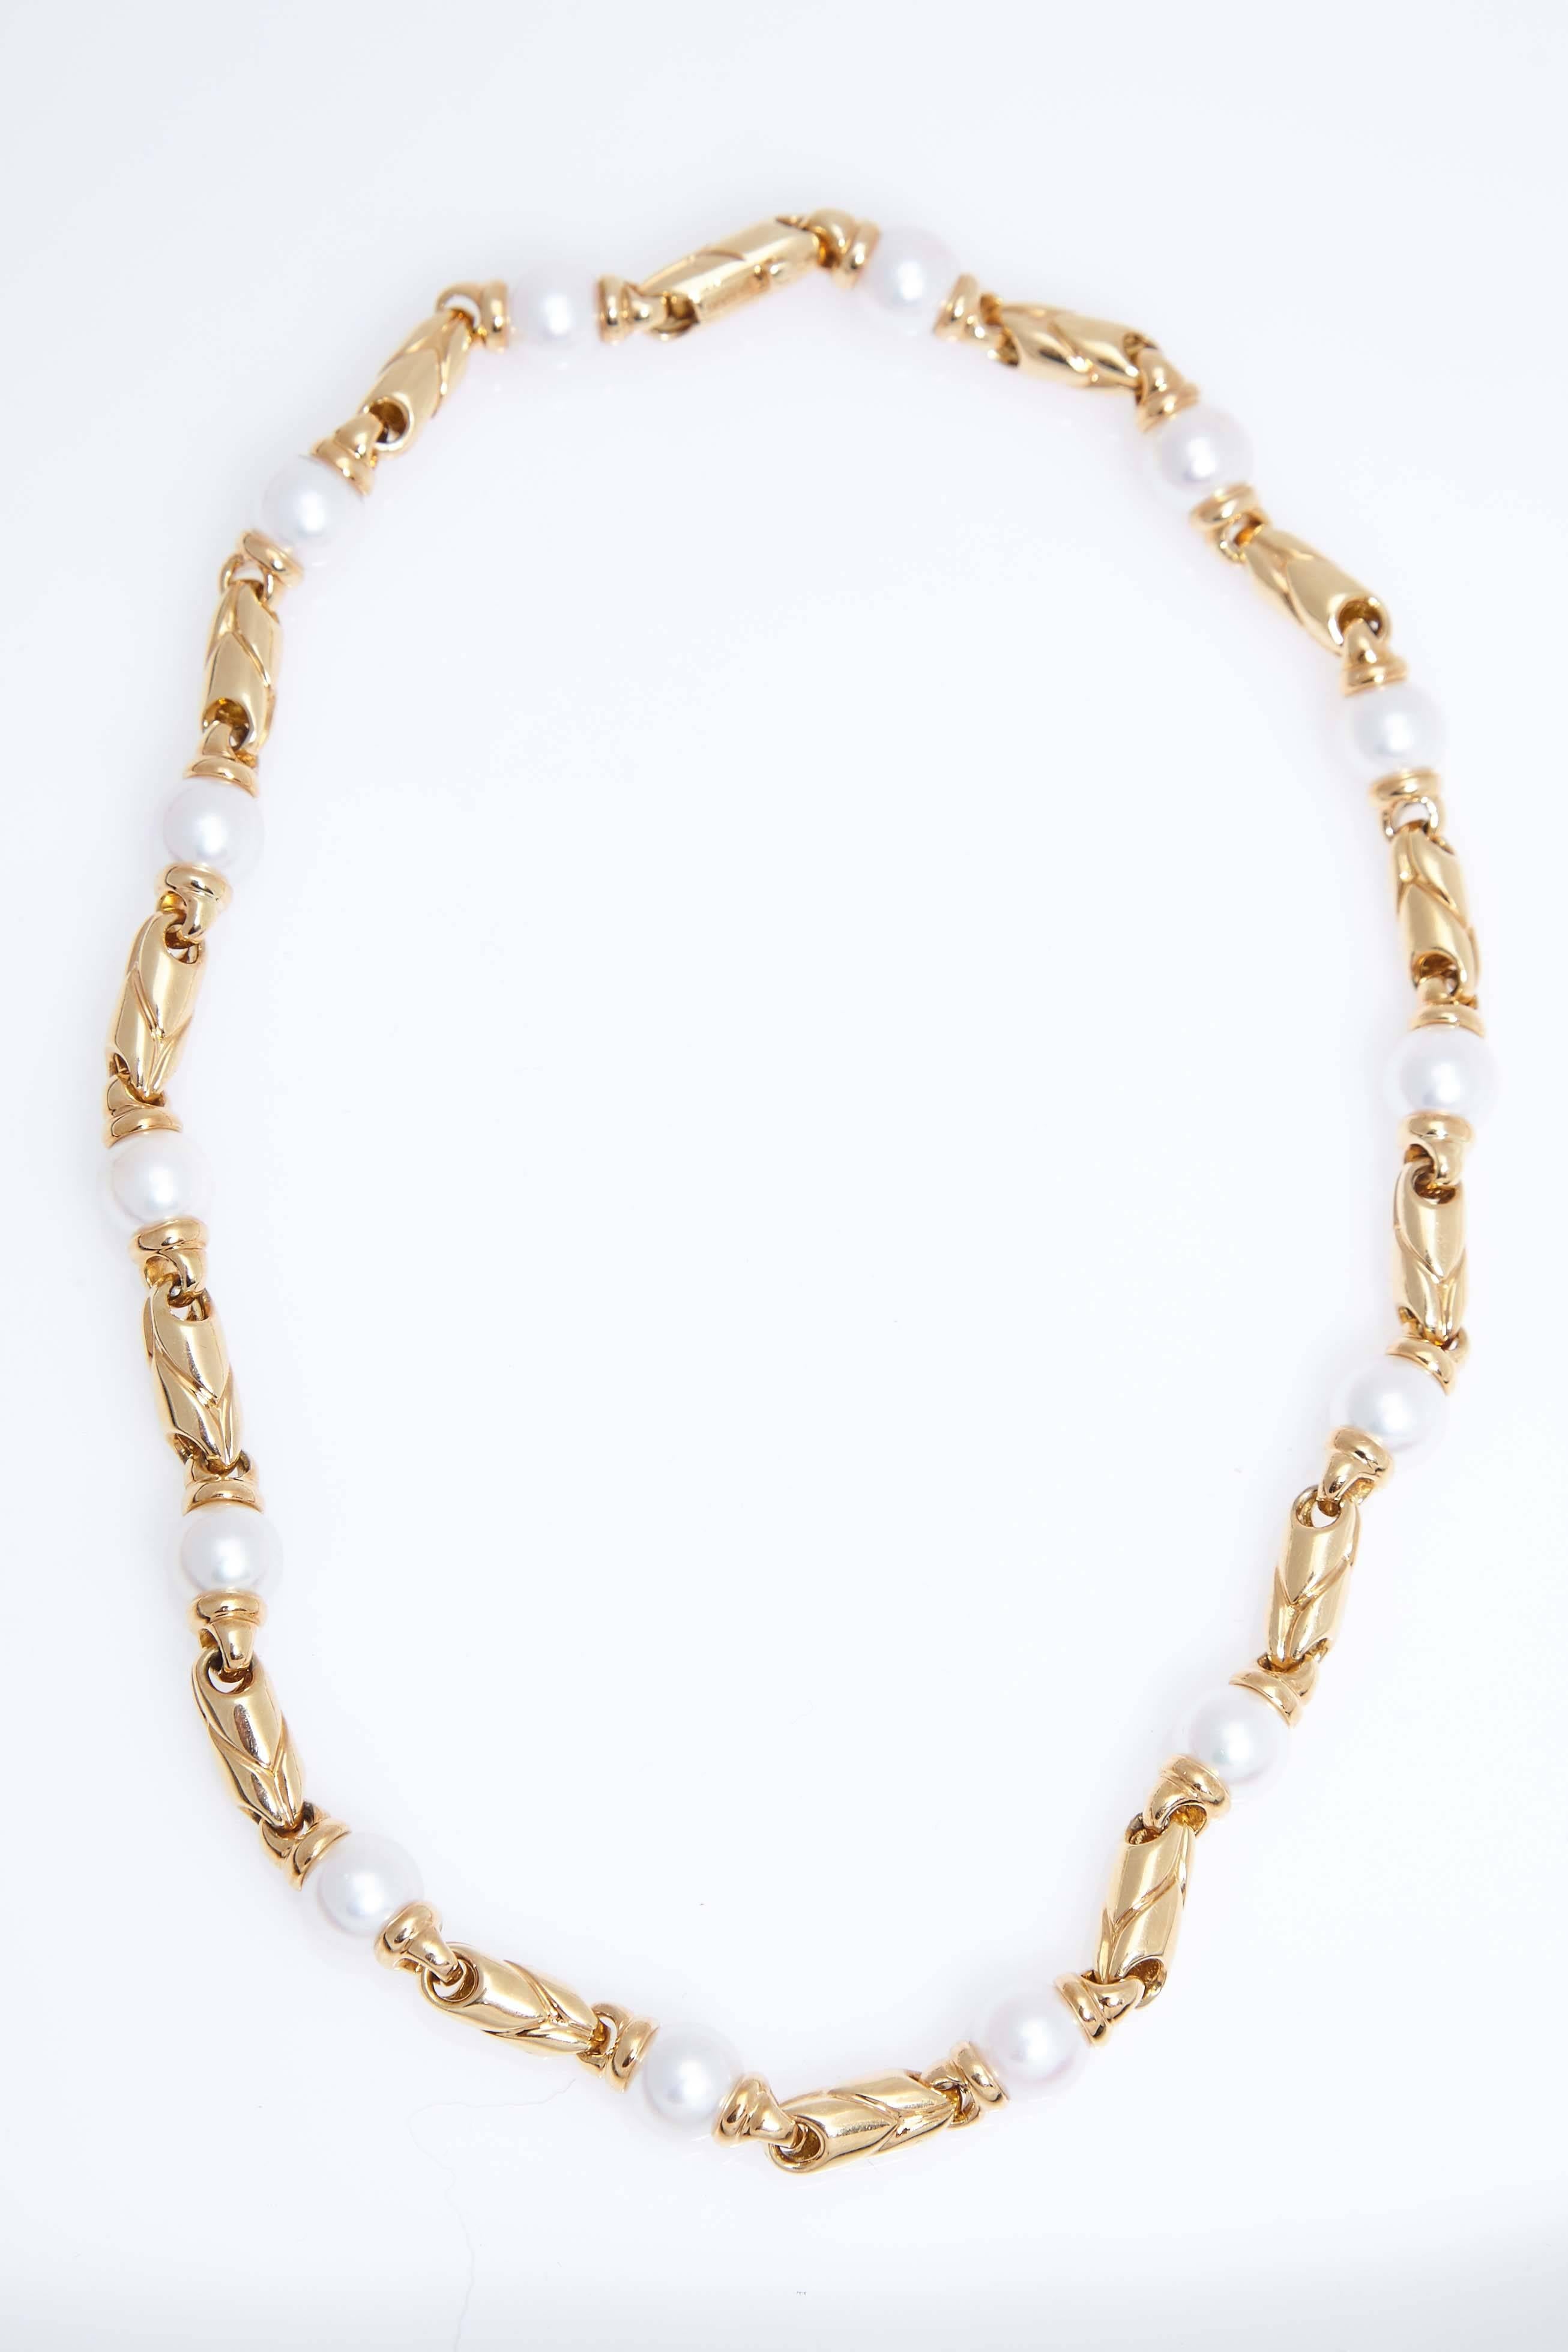 Bulgari 18 karat yellow gold and cultured pearl link necklace. The necklace contains 14 pearls which are 8.8-8.9 mm in size. The necklace is 16 inches long.  The piece is stamped "BVLGARI, 750".